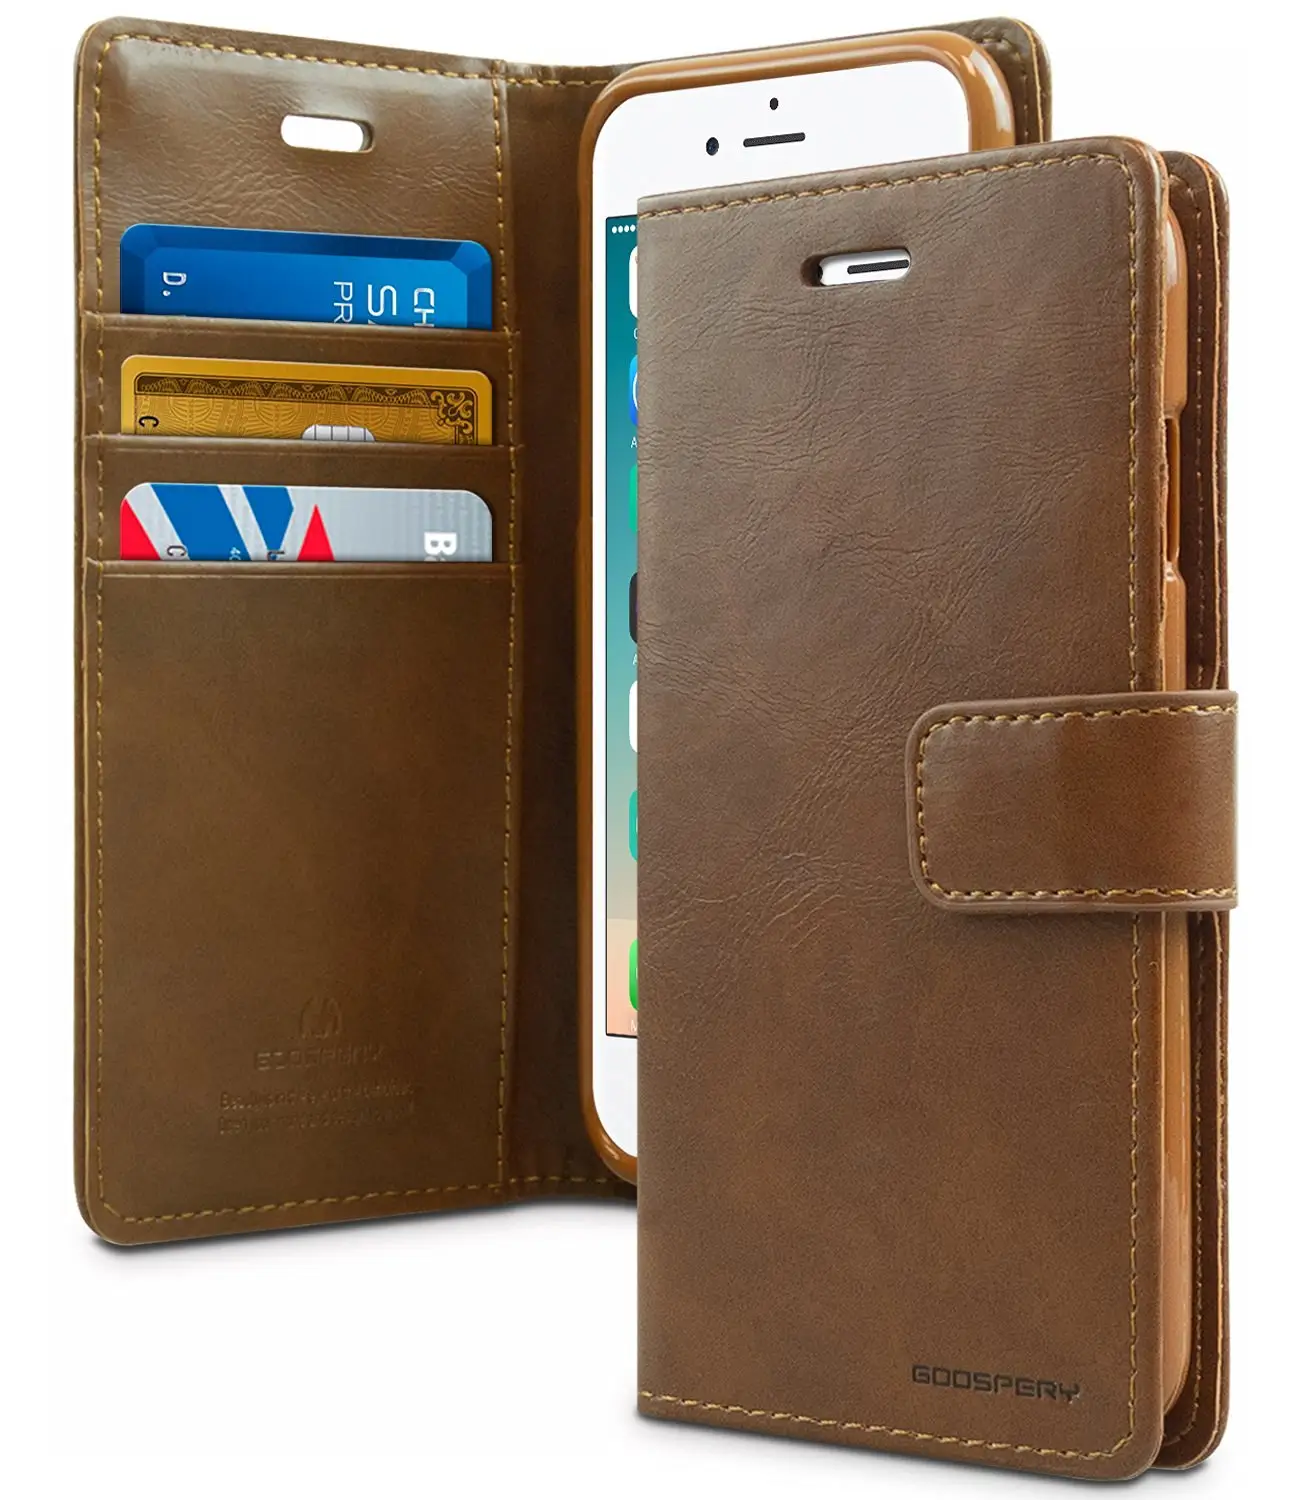 Bluemoon Diary Flip Leather Case For Huawei P SMART PRO 2019 Wallet Case